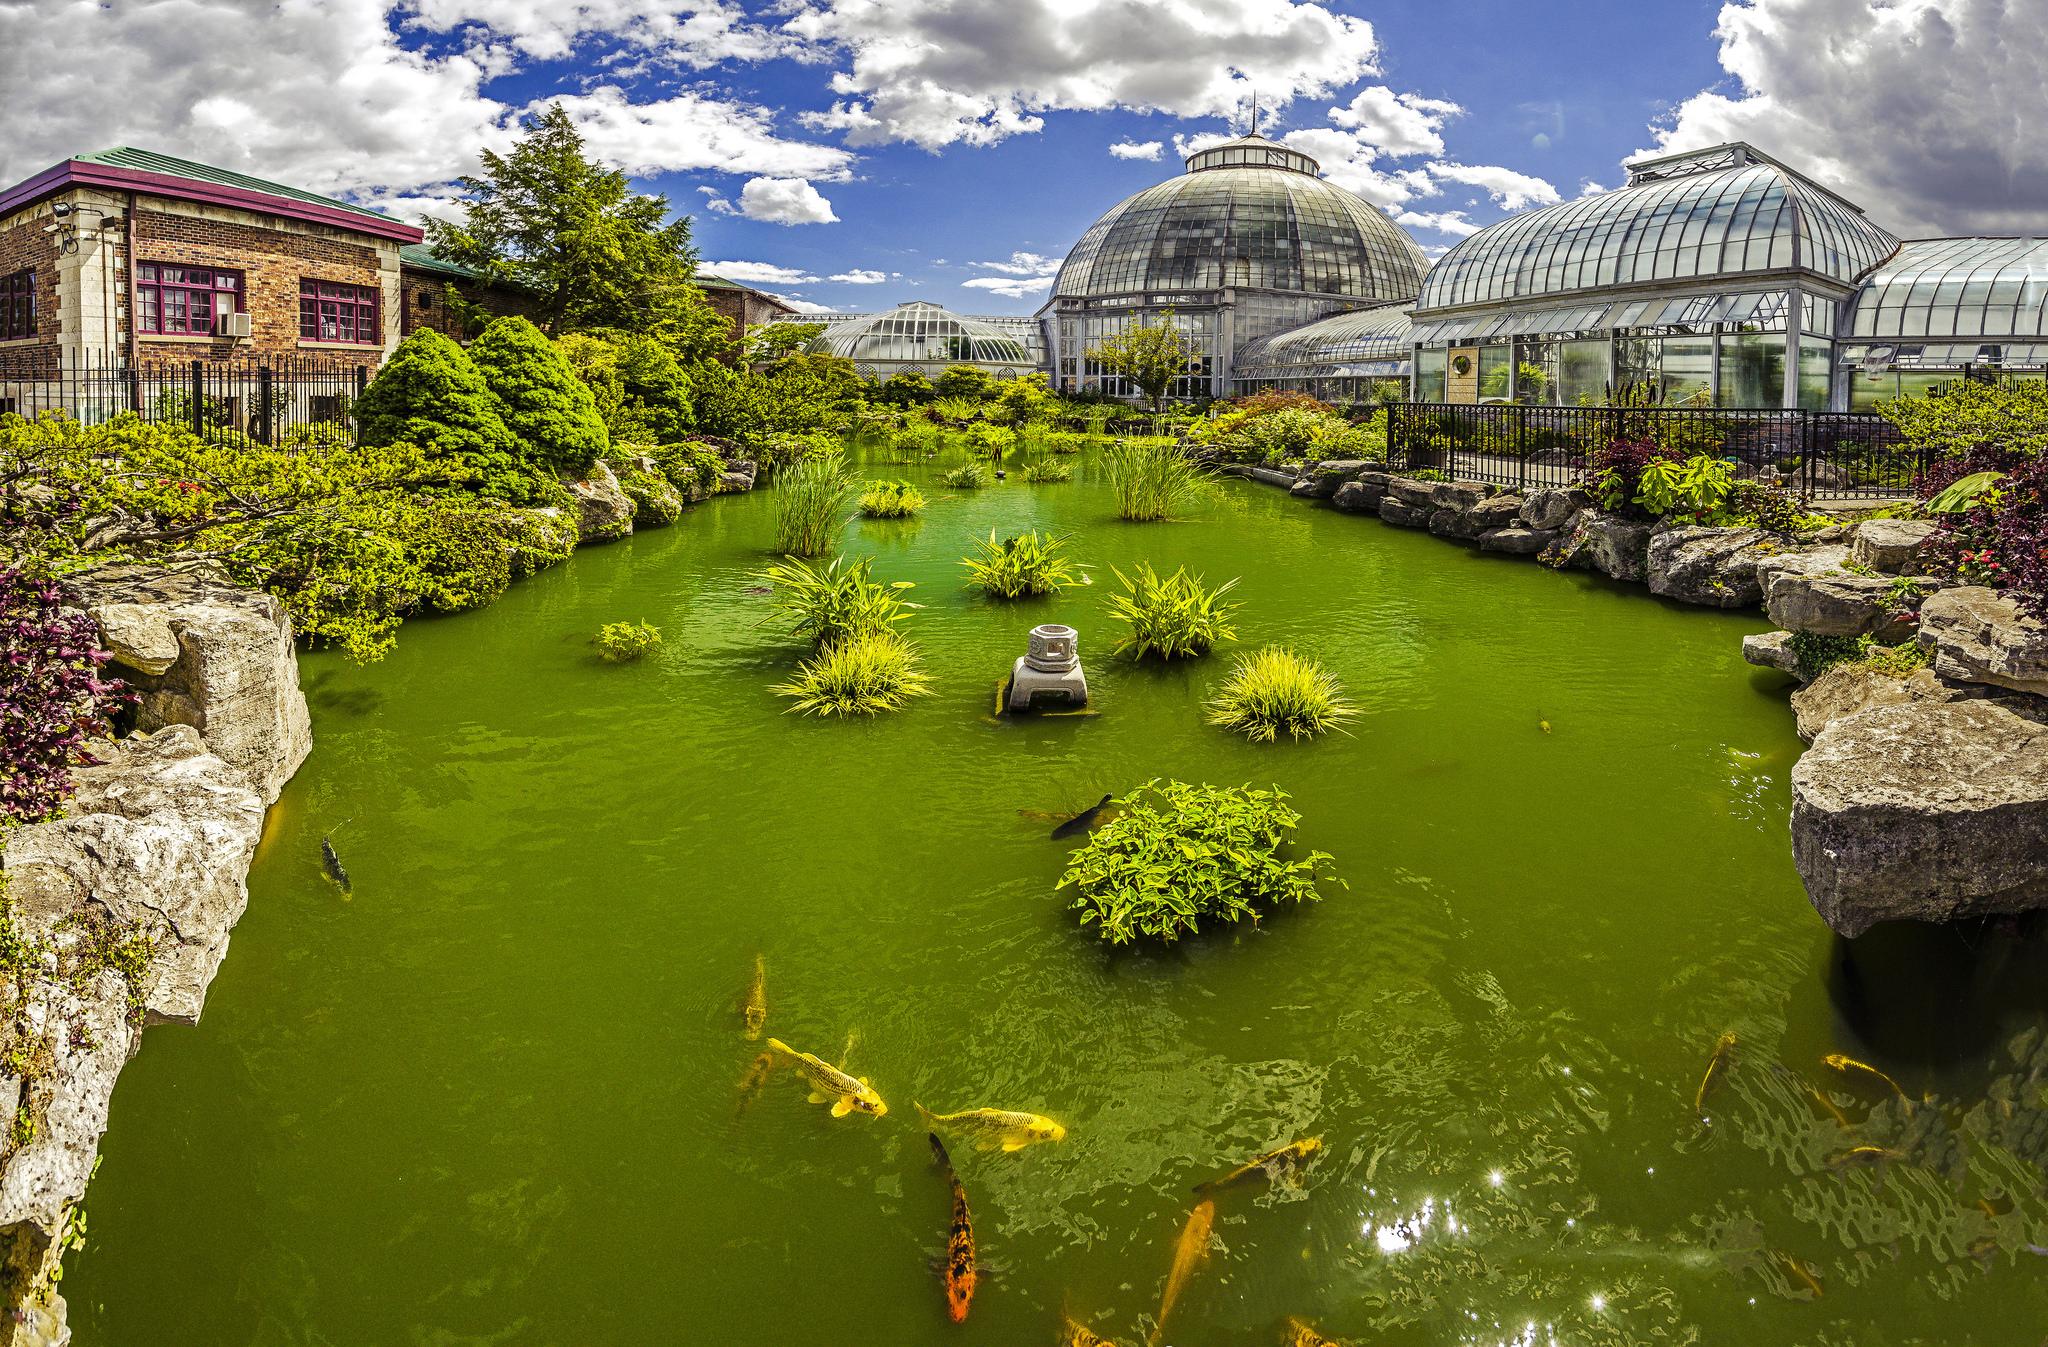 Wallpapers the pond and greenhouse Belle Isle Michigan on the desktop